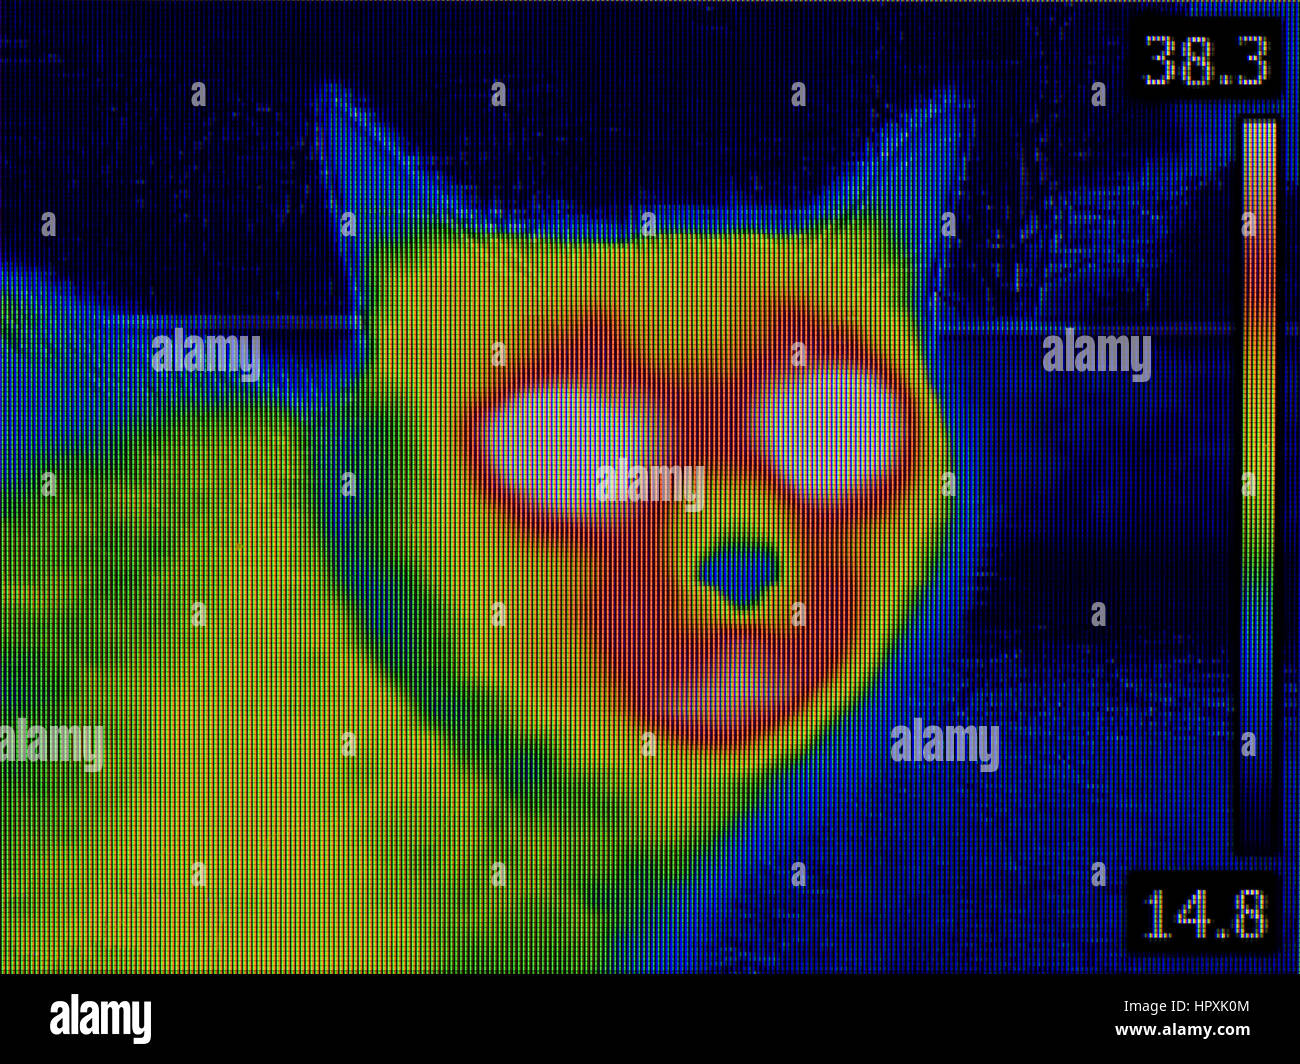 Fever Thermal Image of Cat Head Stock Photo